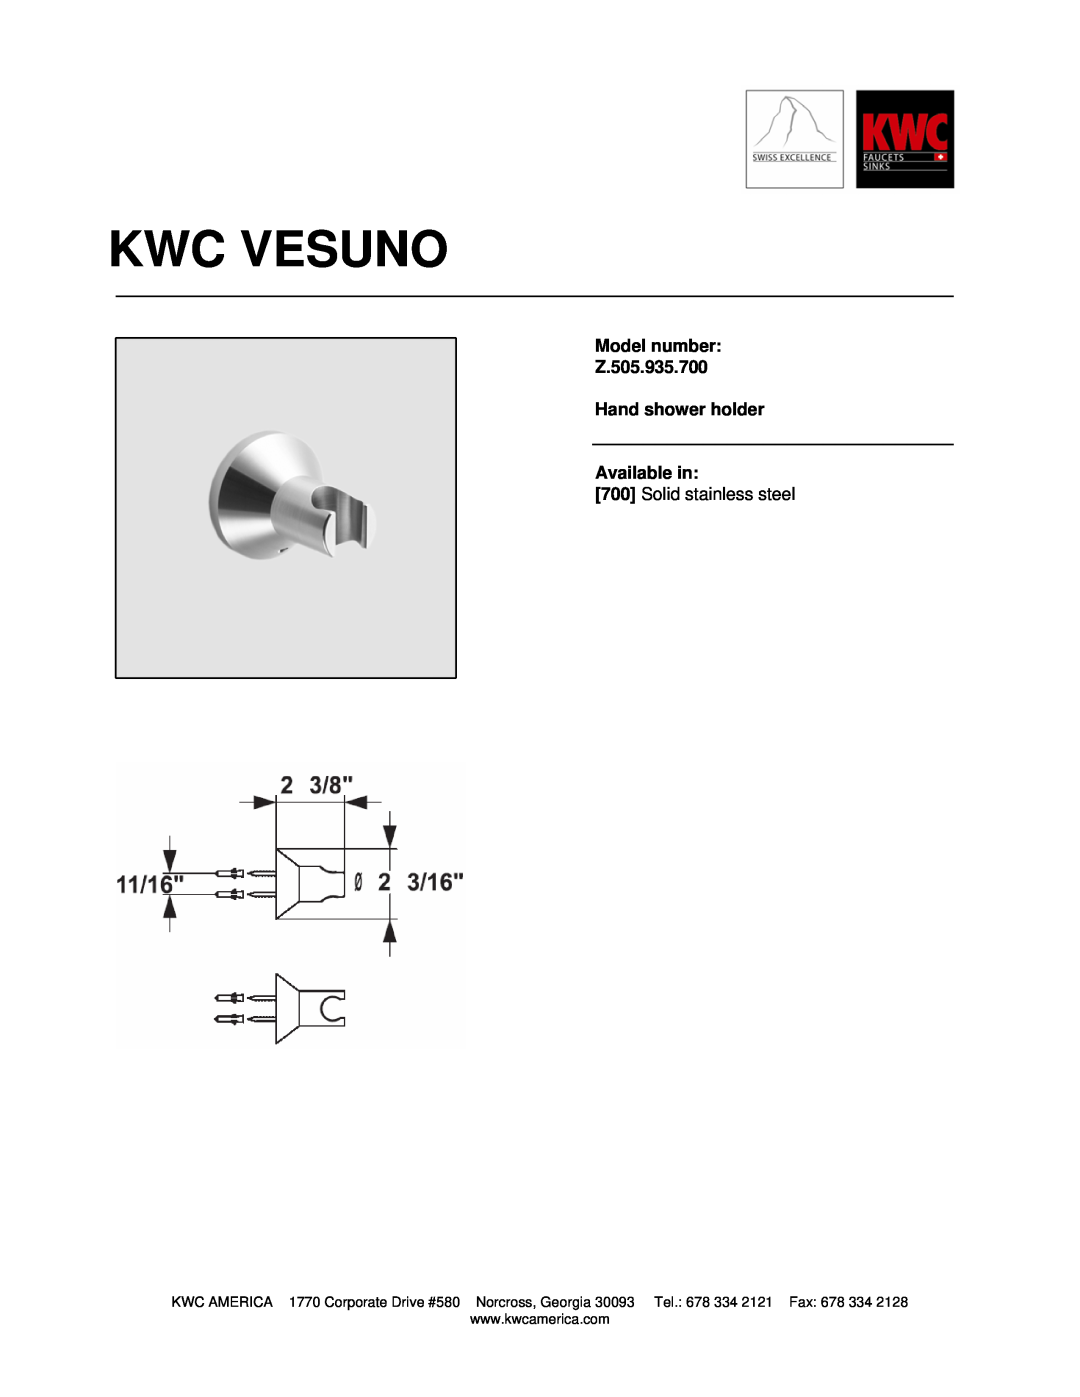 KWC manual Kwc Vesuno, Model number Z.505.935.700 Hand shower holder, Available in, Solid stainless steel 